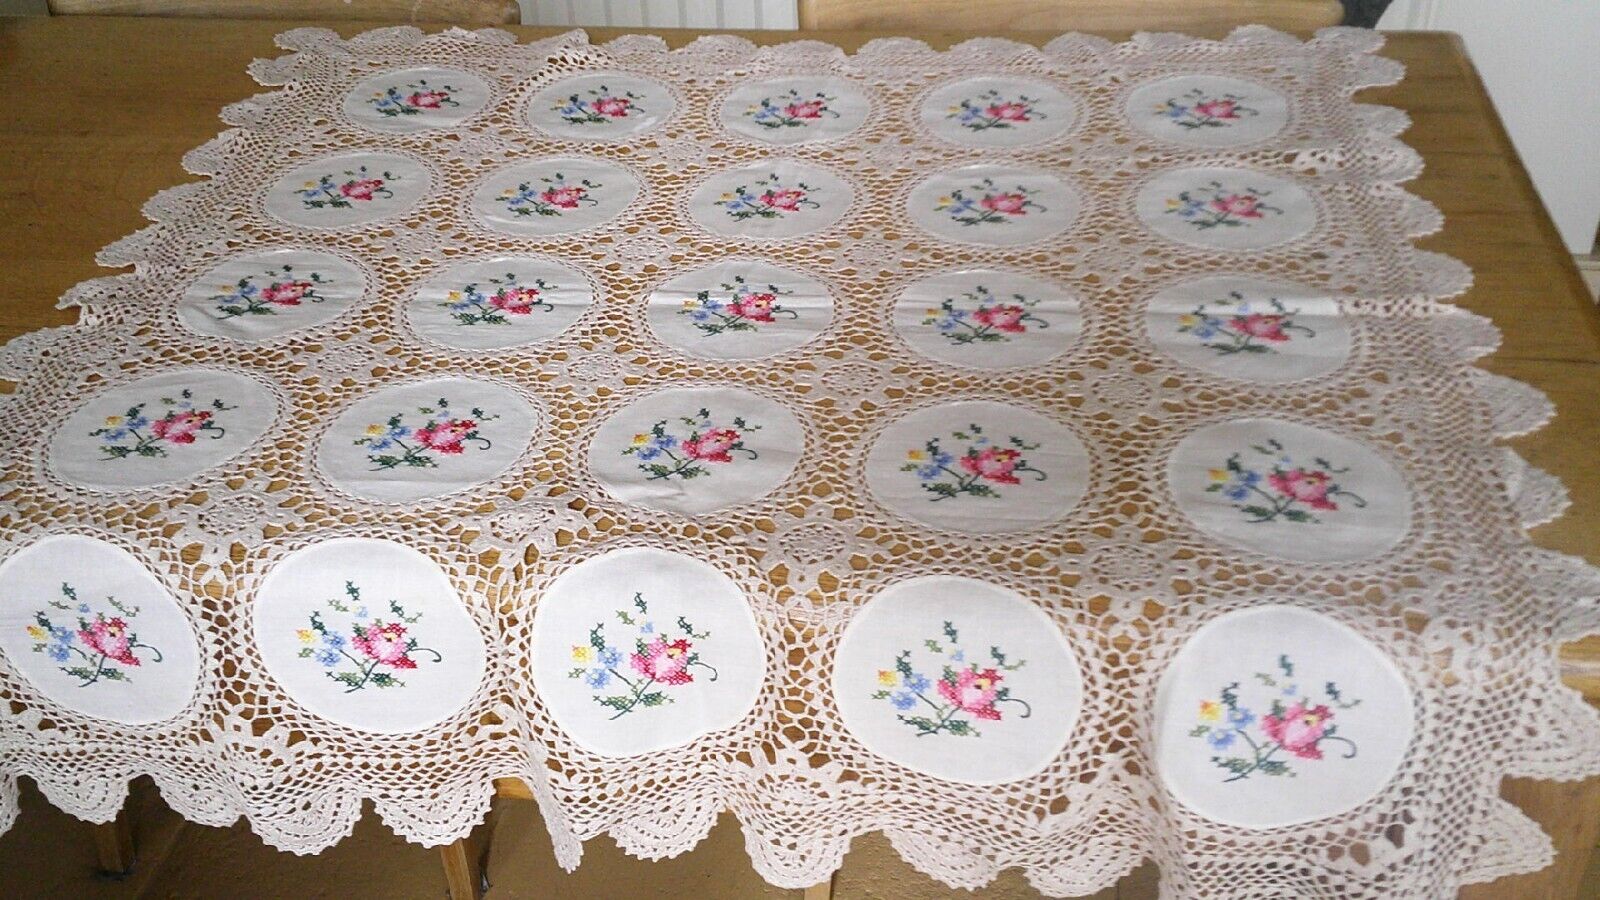 VINTAGE HAND EMBROIDERED TABLECLOTH - LACE TRIM